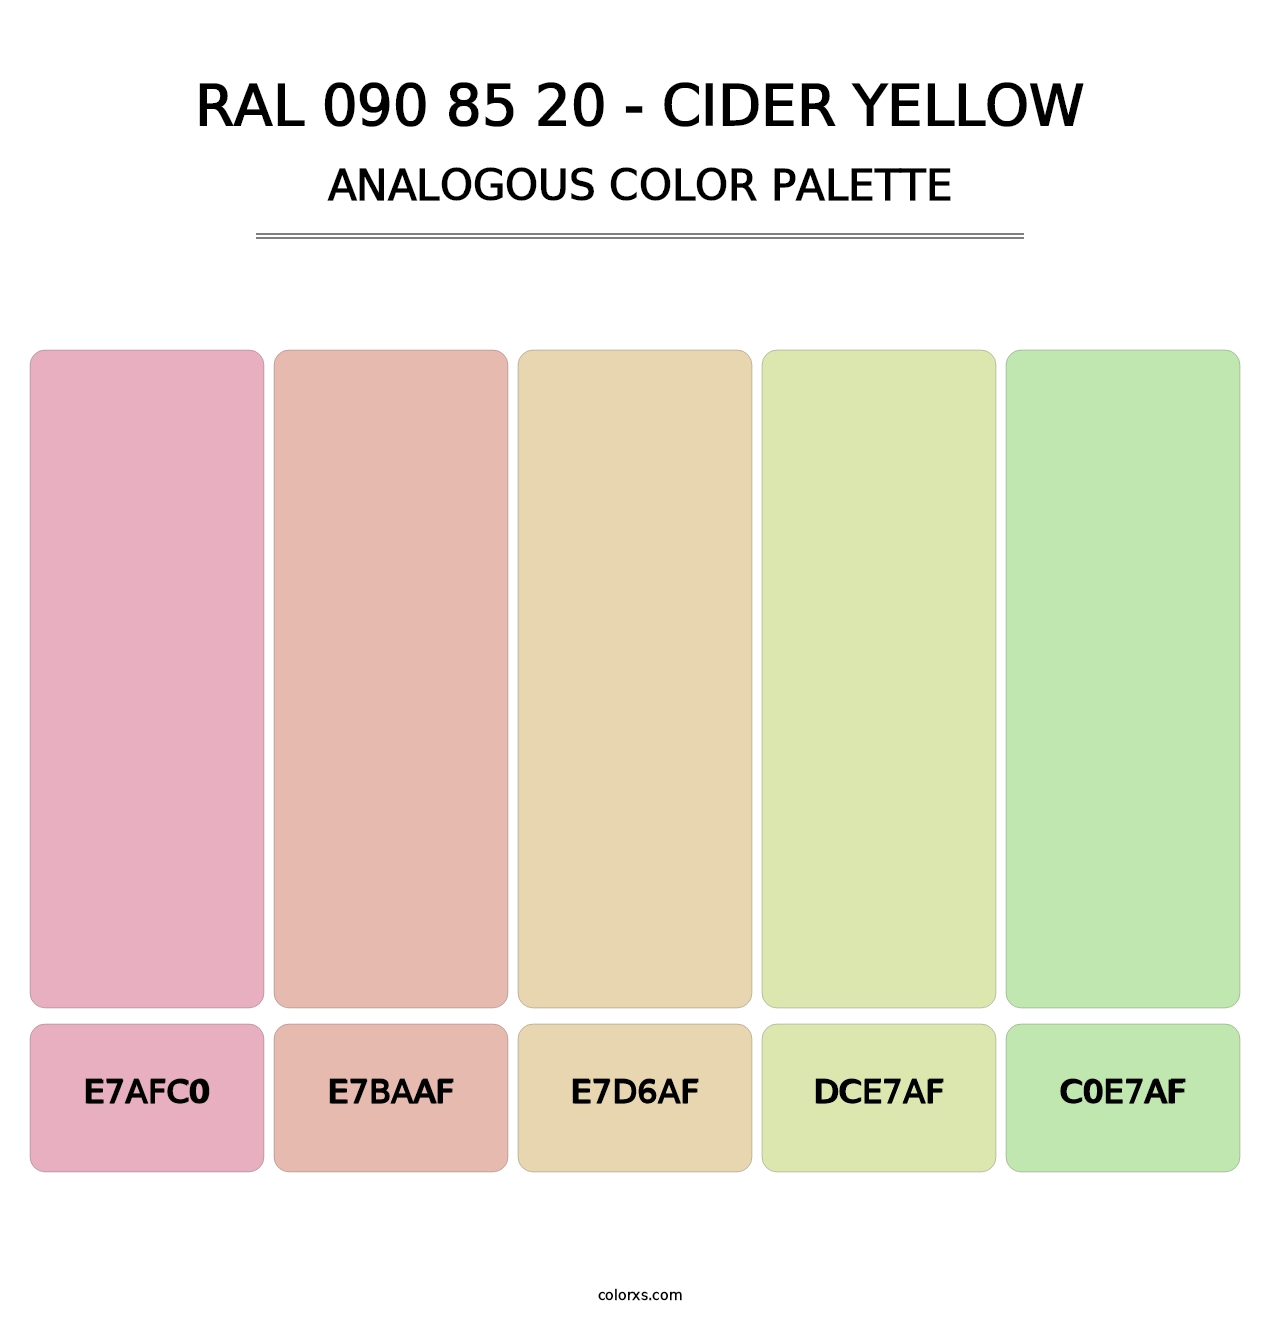 RAL 090 85 20 - Cider Yellow - Analogous Color Palette